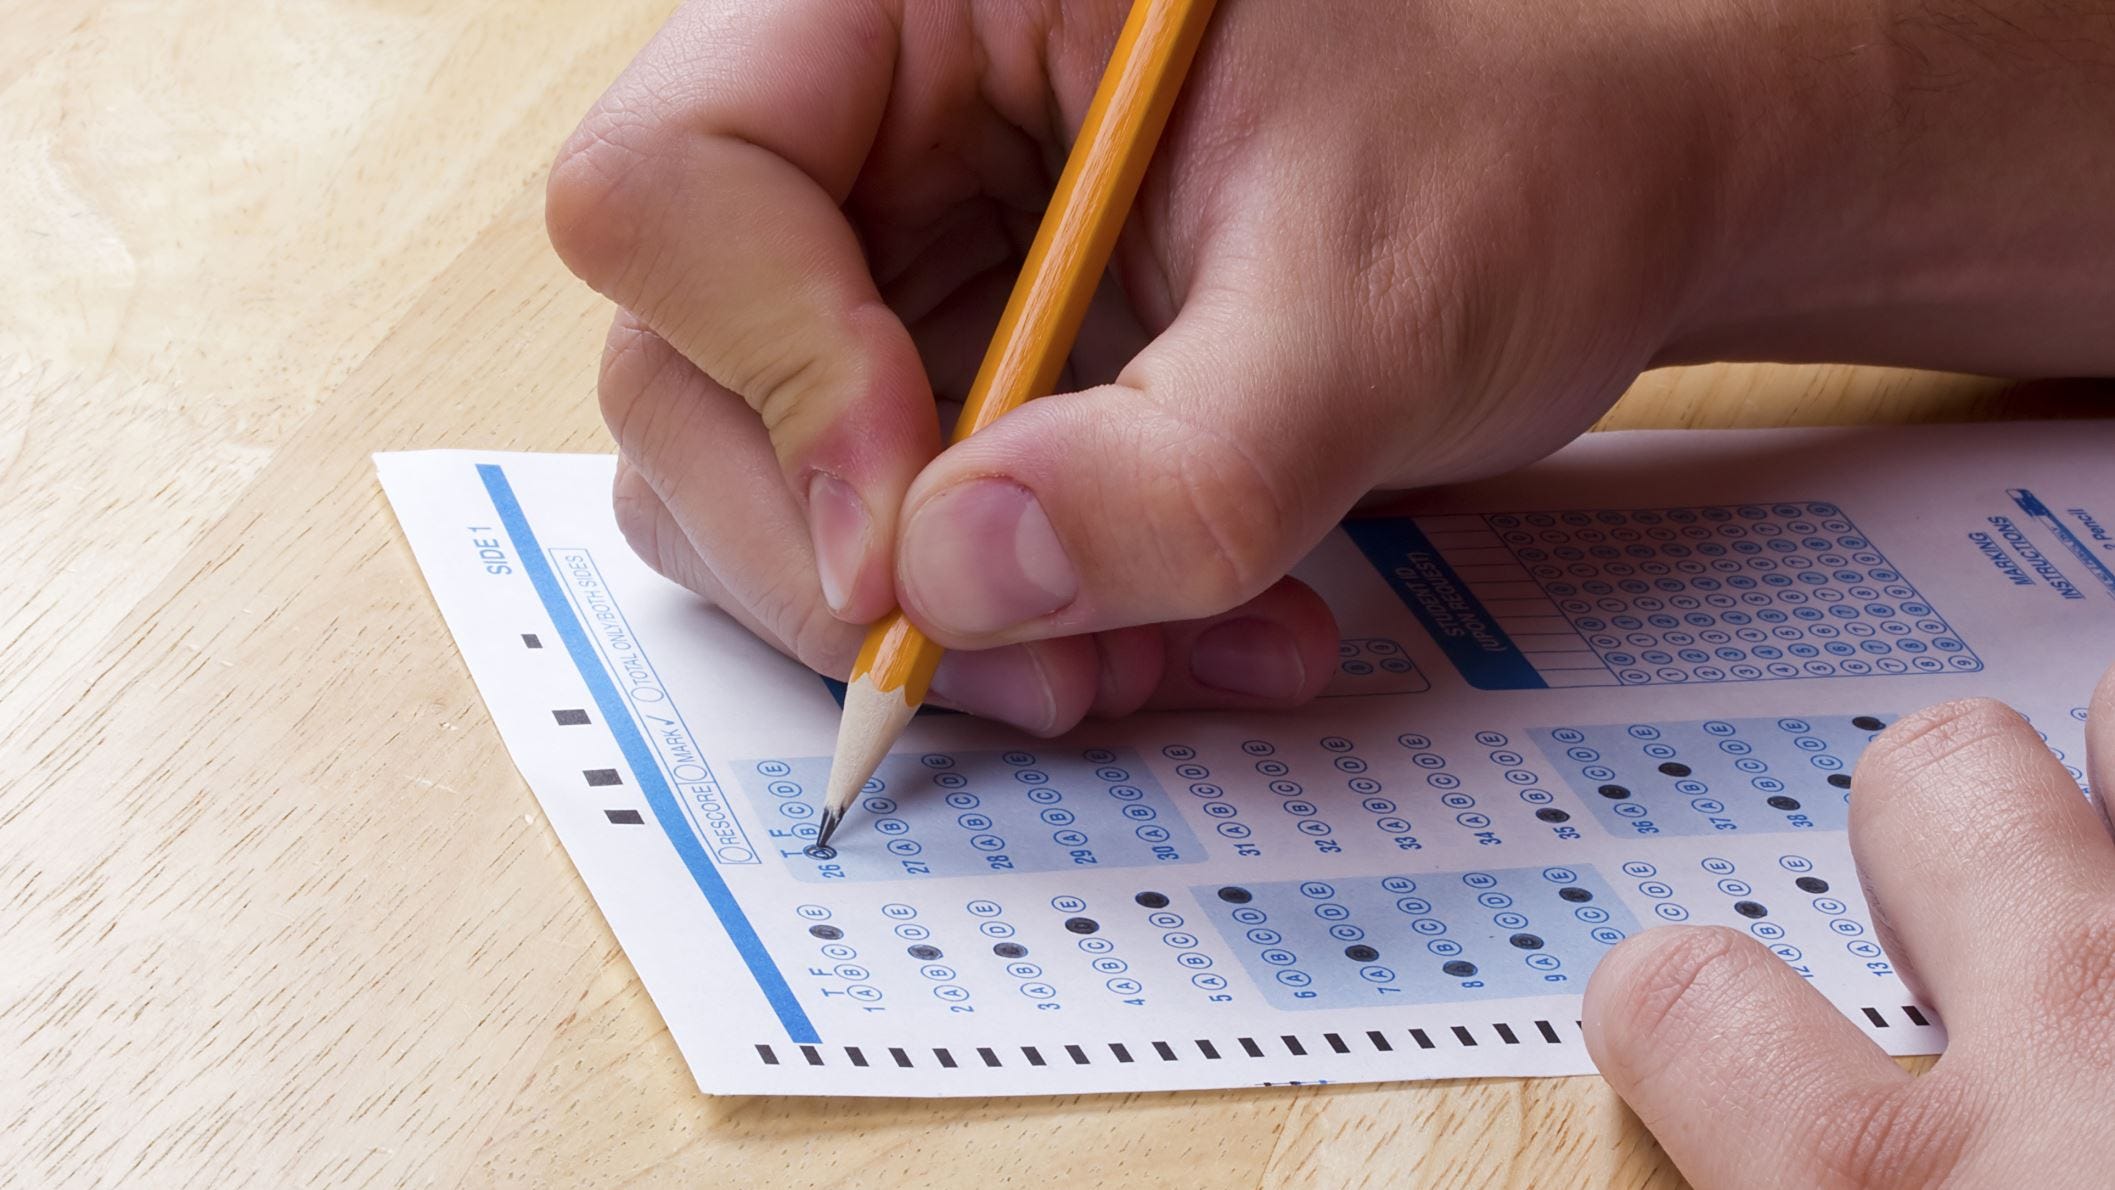 Regents exams NY may cancel 6 tests in 2021; 4 to be administered